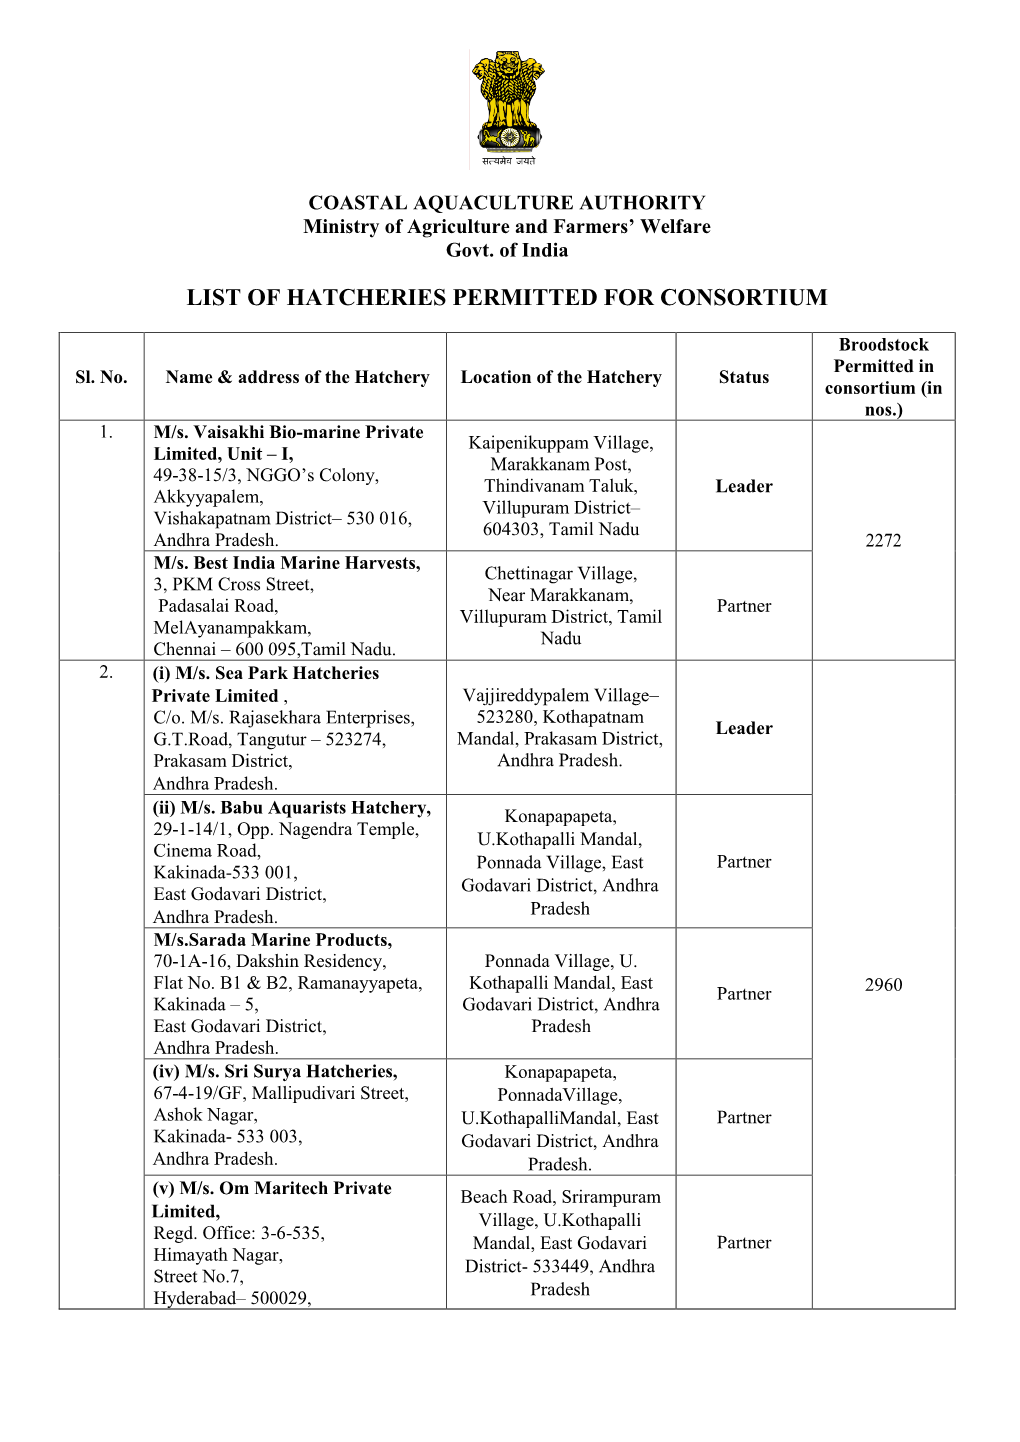 List of Hatcheries Permitted for Consortium